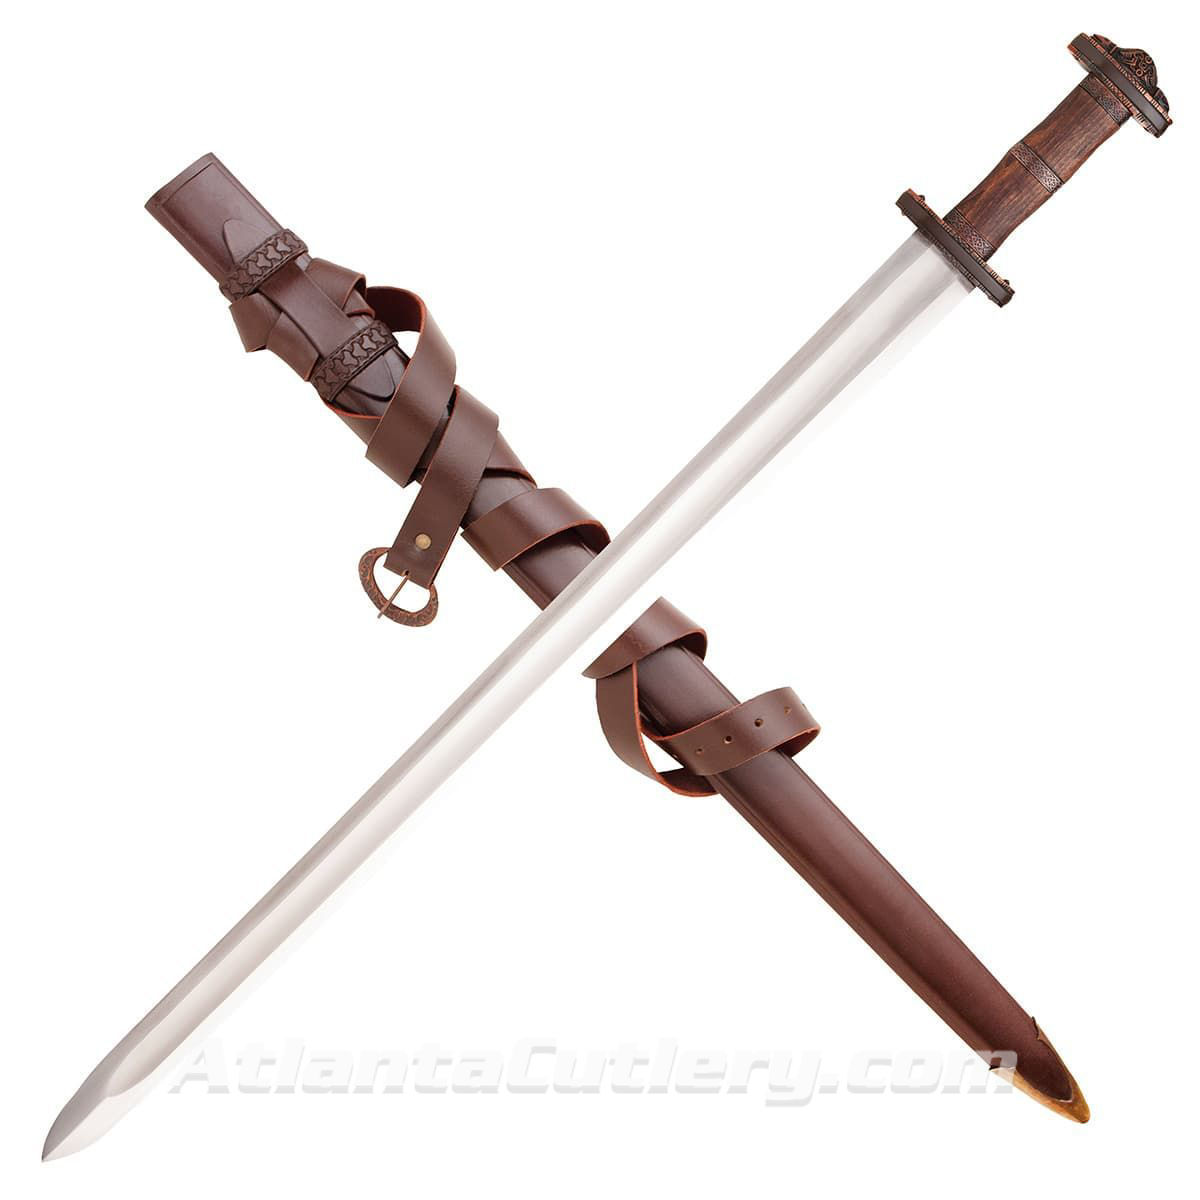 Matching Leather Scabbard and Baldric with the Gotland Sword